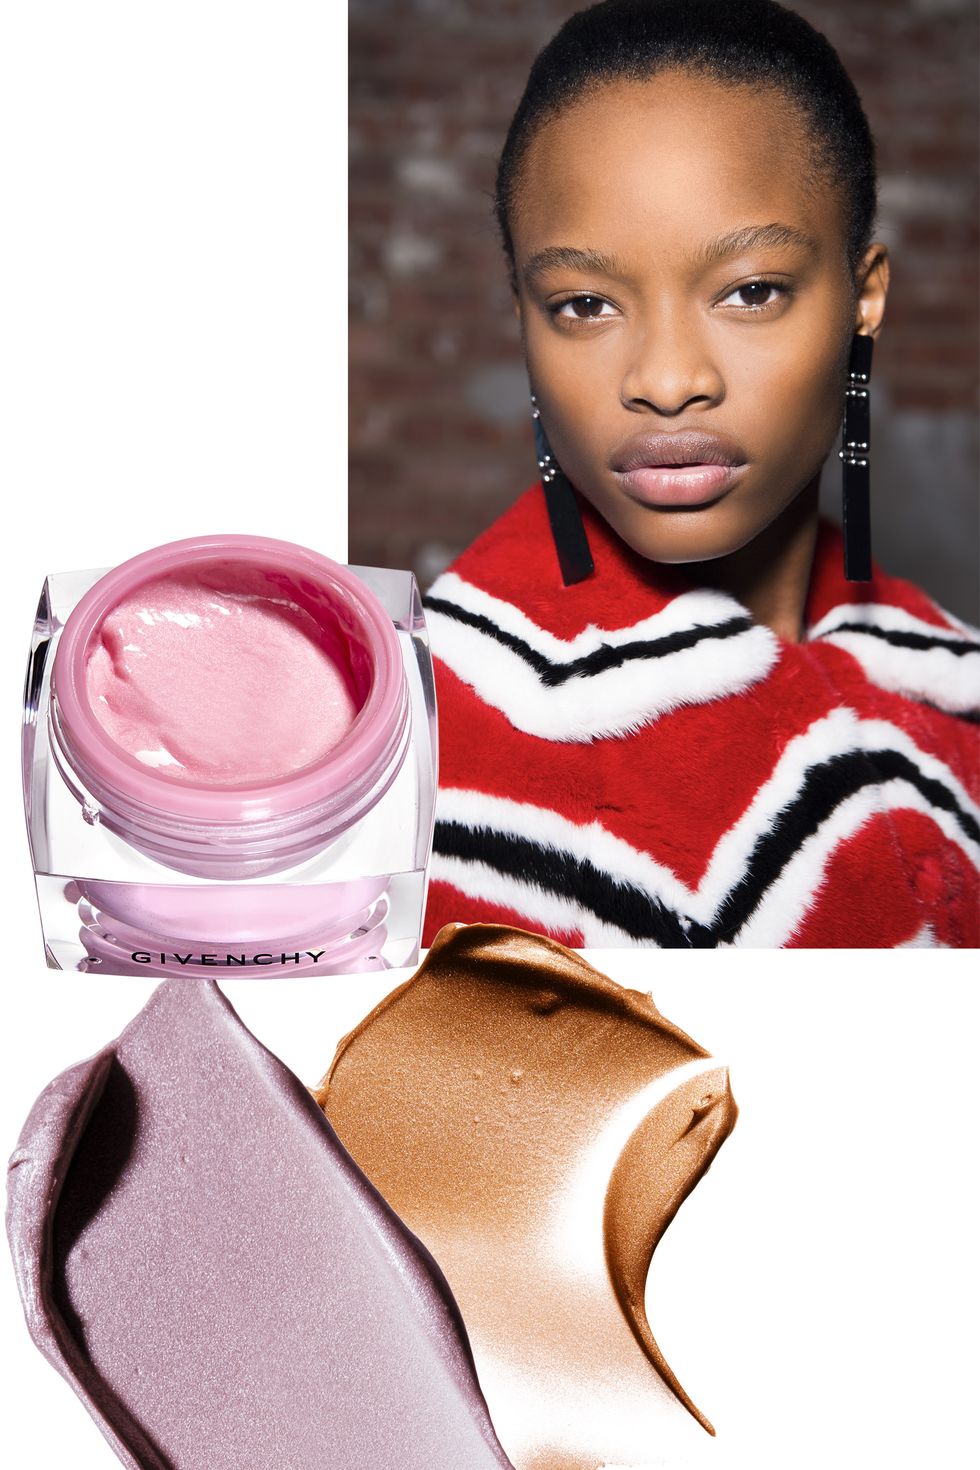 <p>When choosing a highlighter, keep&nbsp;in mind what type of illumination&nbsp;you want, says Givenchy Le&nbsp;Makeup artistic director Nicolas&nbsp;Degennes. "Powders create a&nbsp;matte effect, whereas a gel gives&nbsp;you more of a reflection." Apply on&nbsp;the bridge of your nose, cheekbones,&nbsp;and forehead, areas where&nbsp;the sun would naturally reflect light.</p><p><em data-redactor-tag="em" data-verified="redactor">From left:</em>&nbsp;<a href="http://www.neimanmarcus.com/Givenchy-Limited-Edition-M-233moire-de-Forme-Highlighter/prod197680011/p.prod" target="_blank" data-tracking-id="recirc-text-link">Givenchy Mémoire de Forme Highlighter</a> ($45); <a href="https://www.maybelline.com/face-makeup/contouring/facestudio-master-strobing-liquid-illuminating-highlighter/medium-nude-glow" target="_blank" data-tracking-id="recirc-text-link">Maybelline New York FaceStudio Master Strobing Liquid Illuminating Highlighter</a> in Medium/Nude Glow and Light/Iridescent ($10 each).</p>